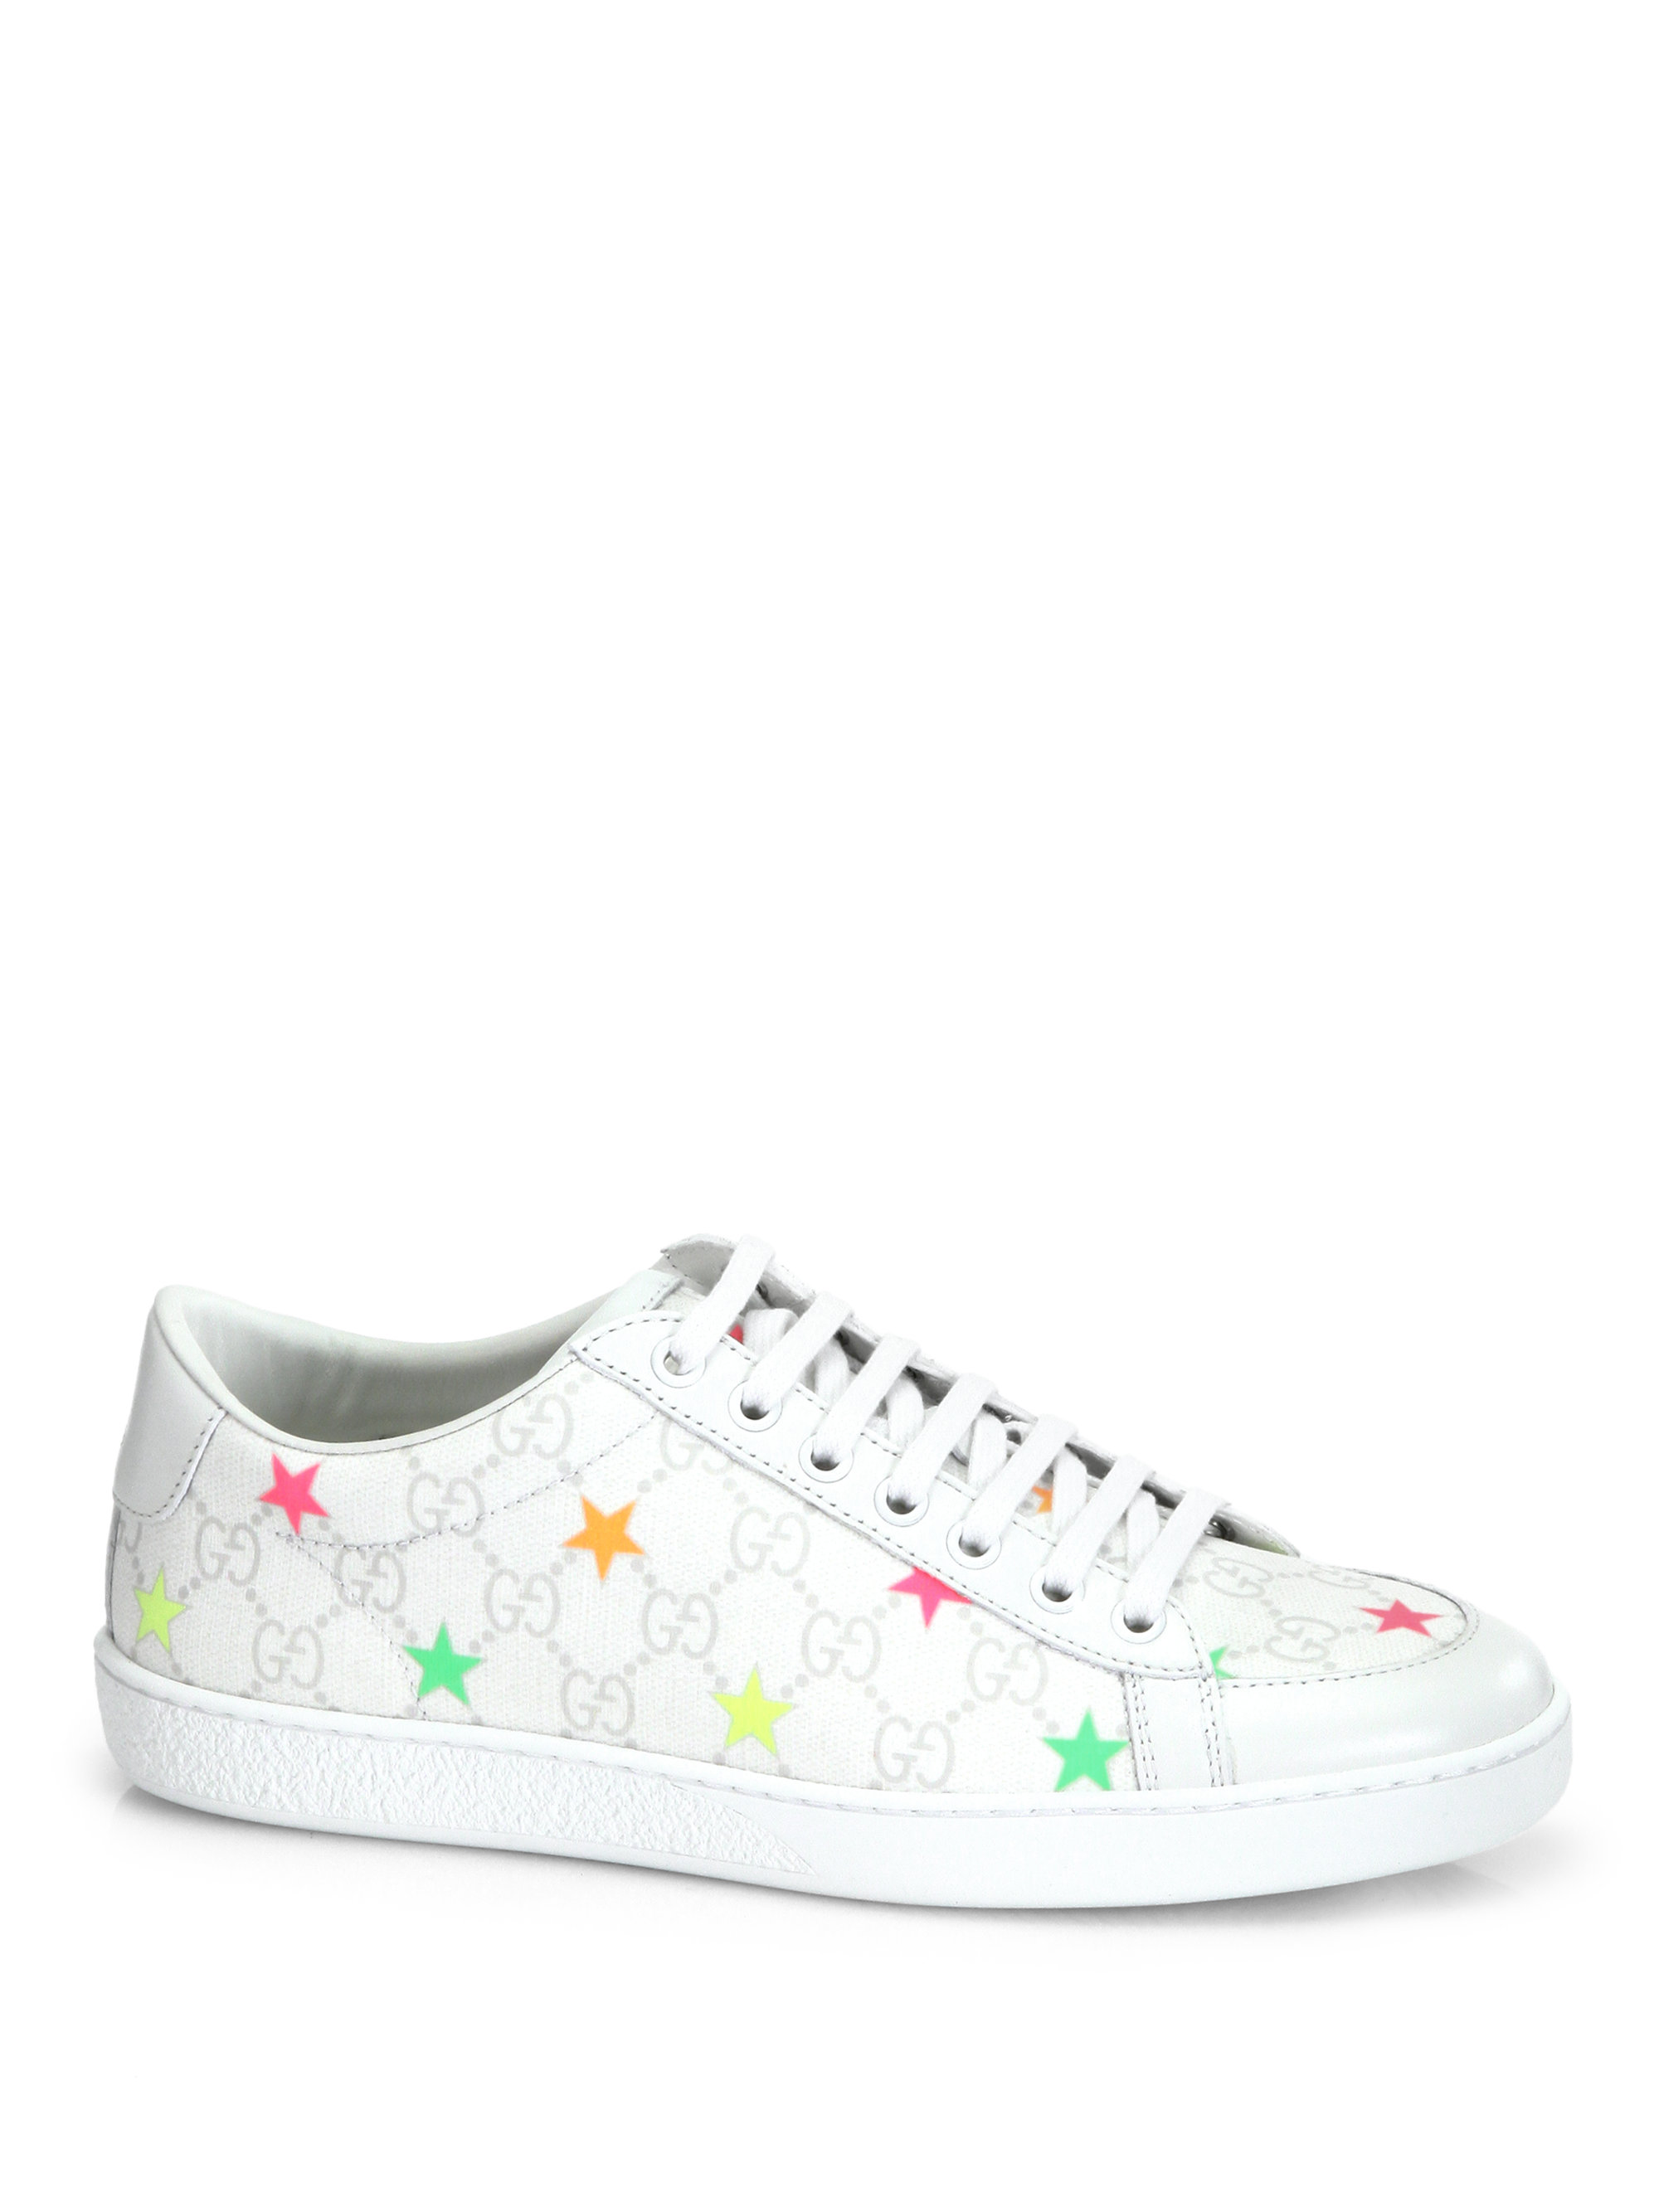 gucci trainers with stars